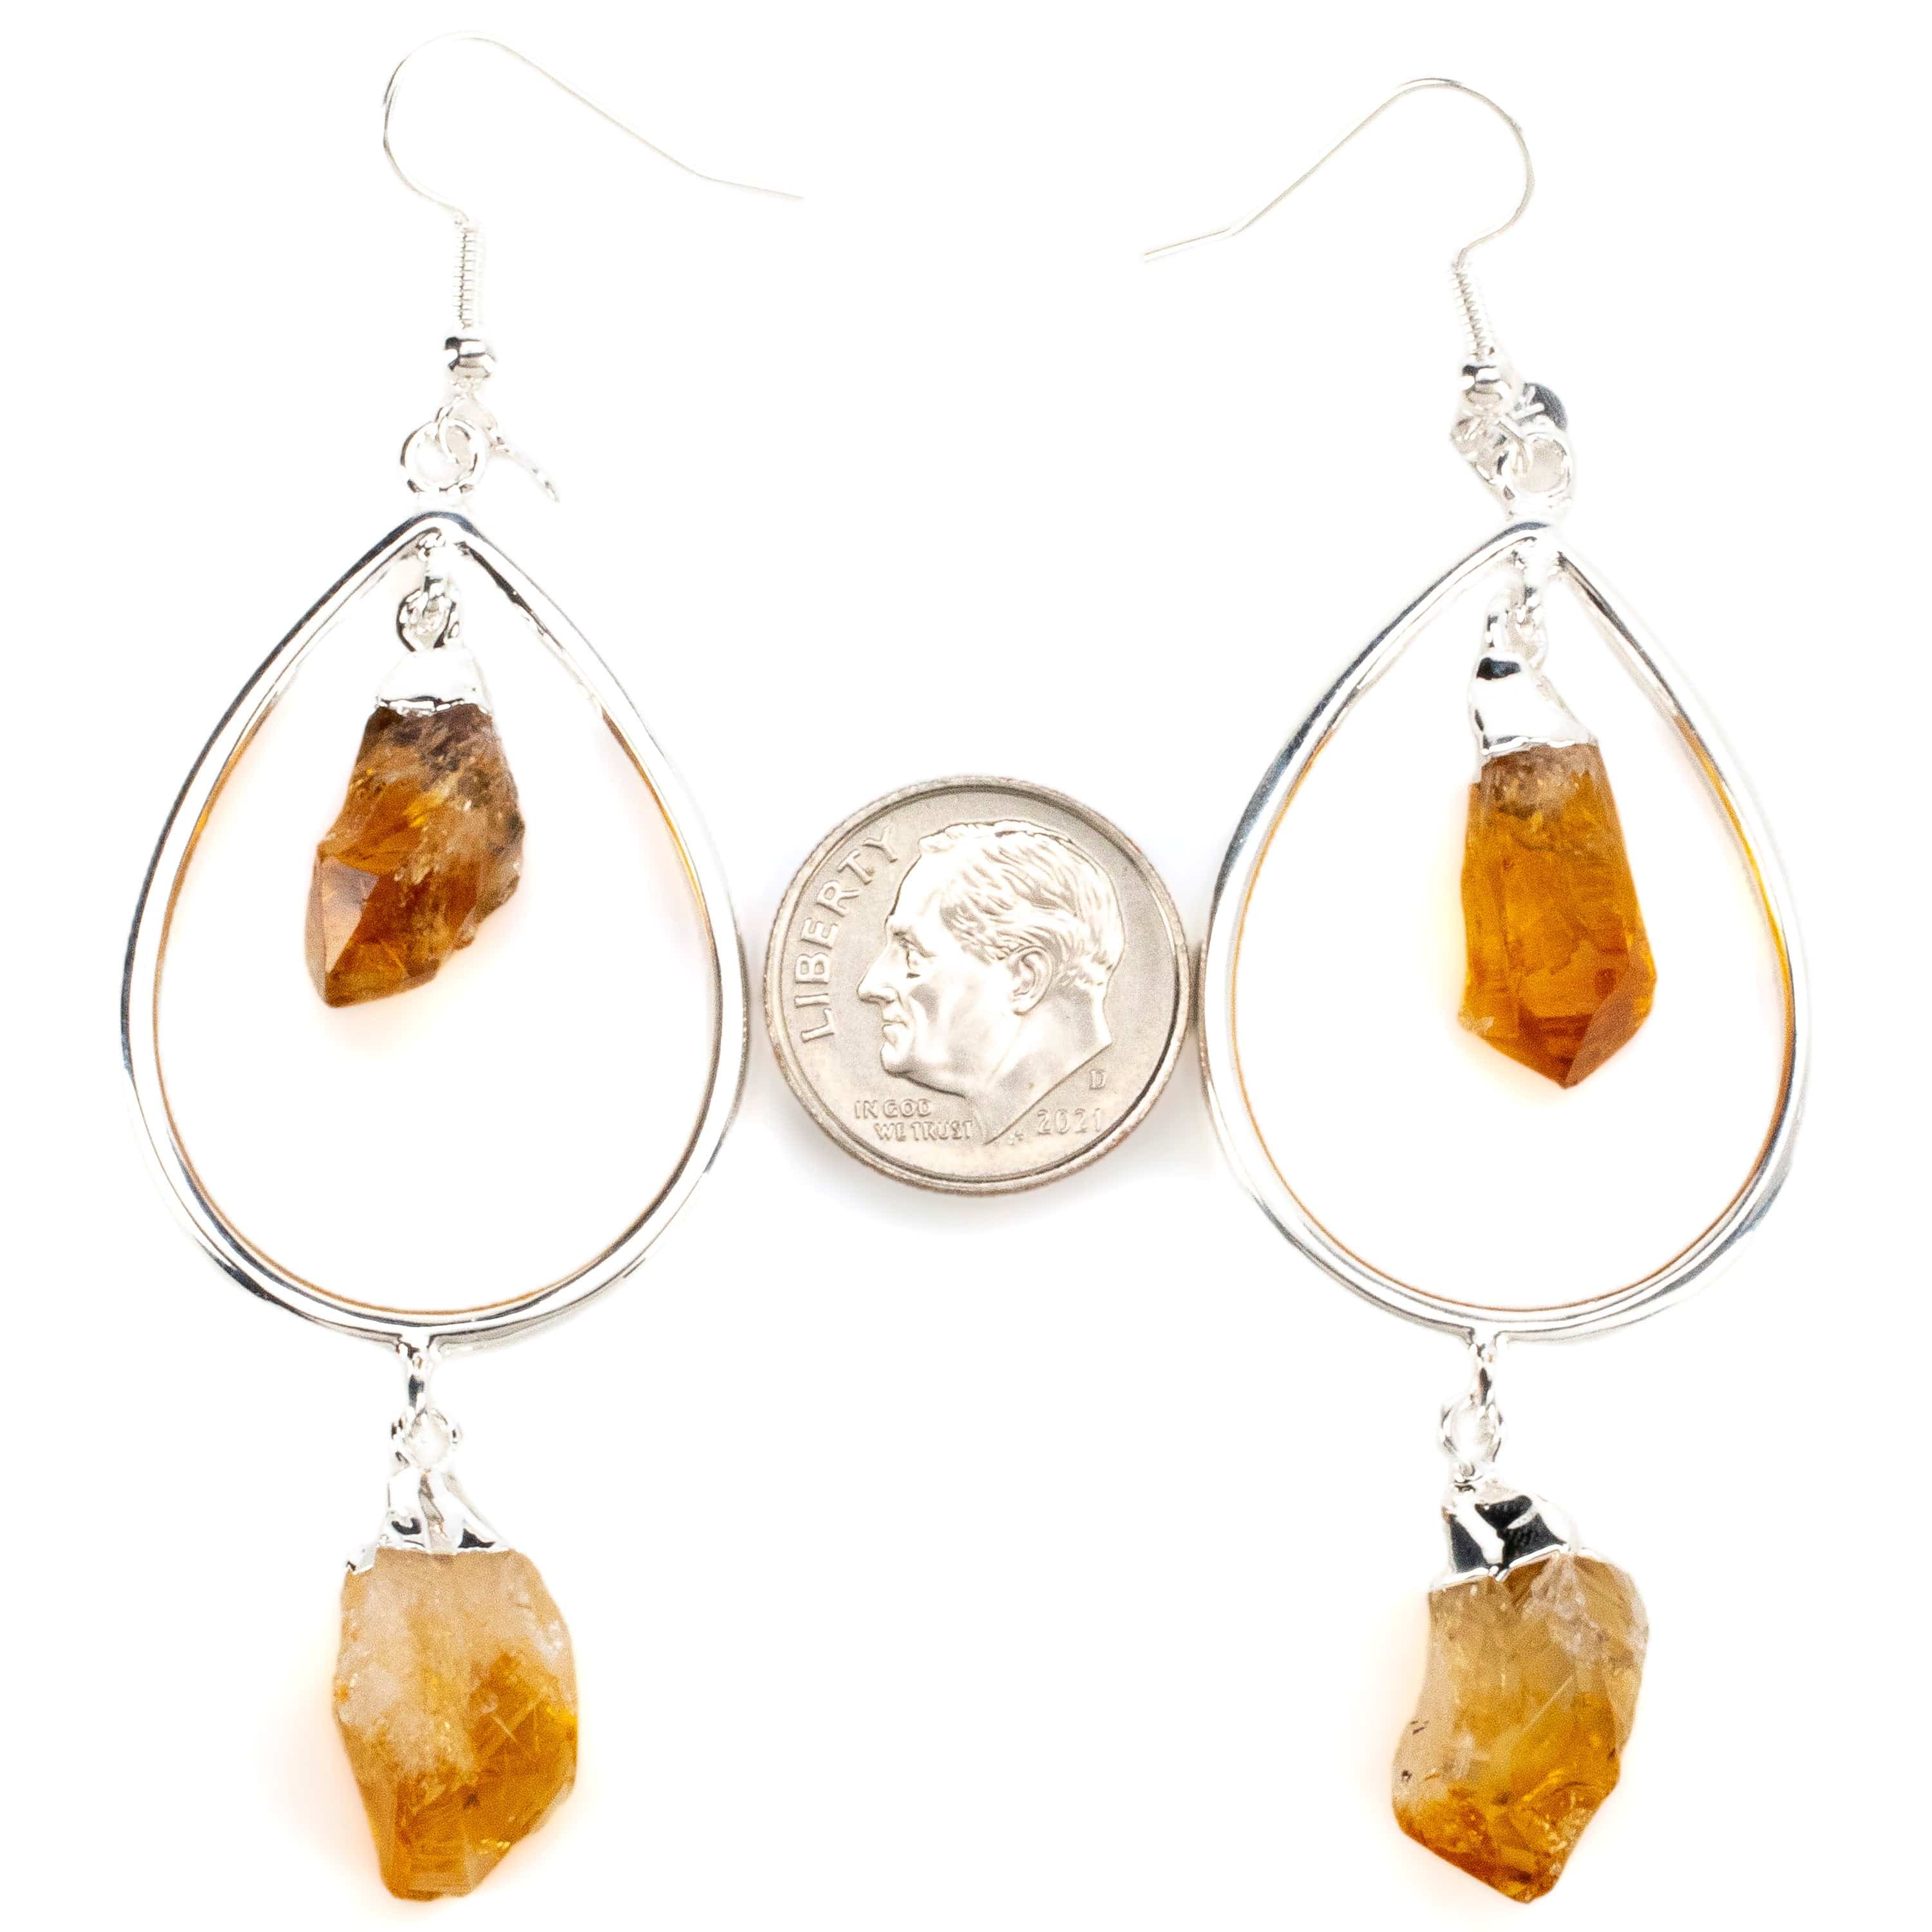 Kalifano Crystal Jewelry Citrine Crystal Drop Earrings with French Hook CJE-1548-CT